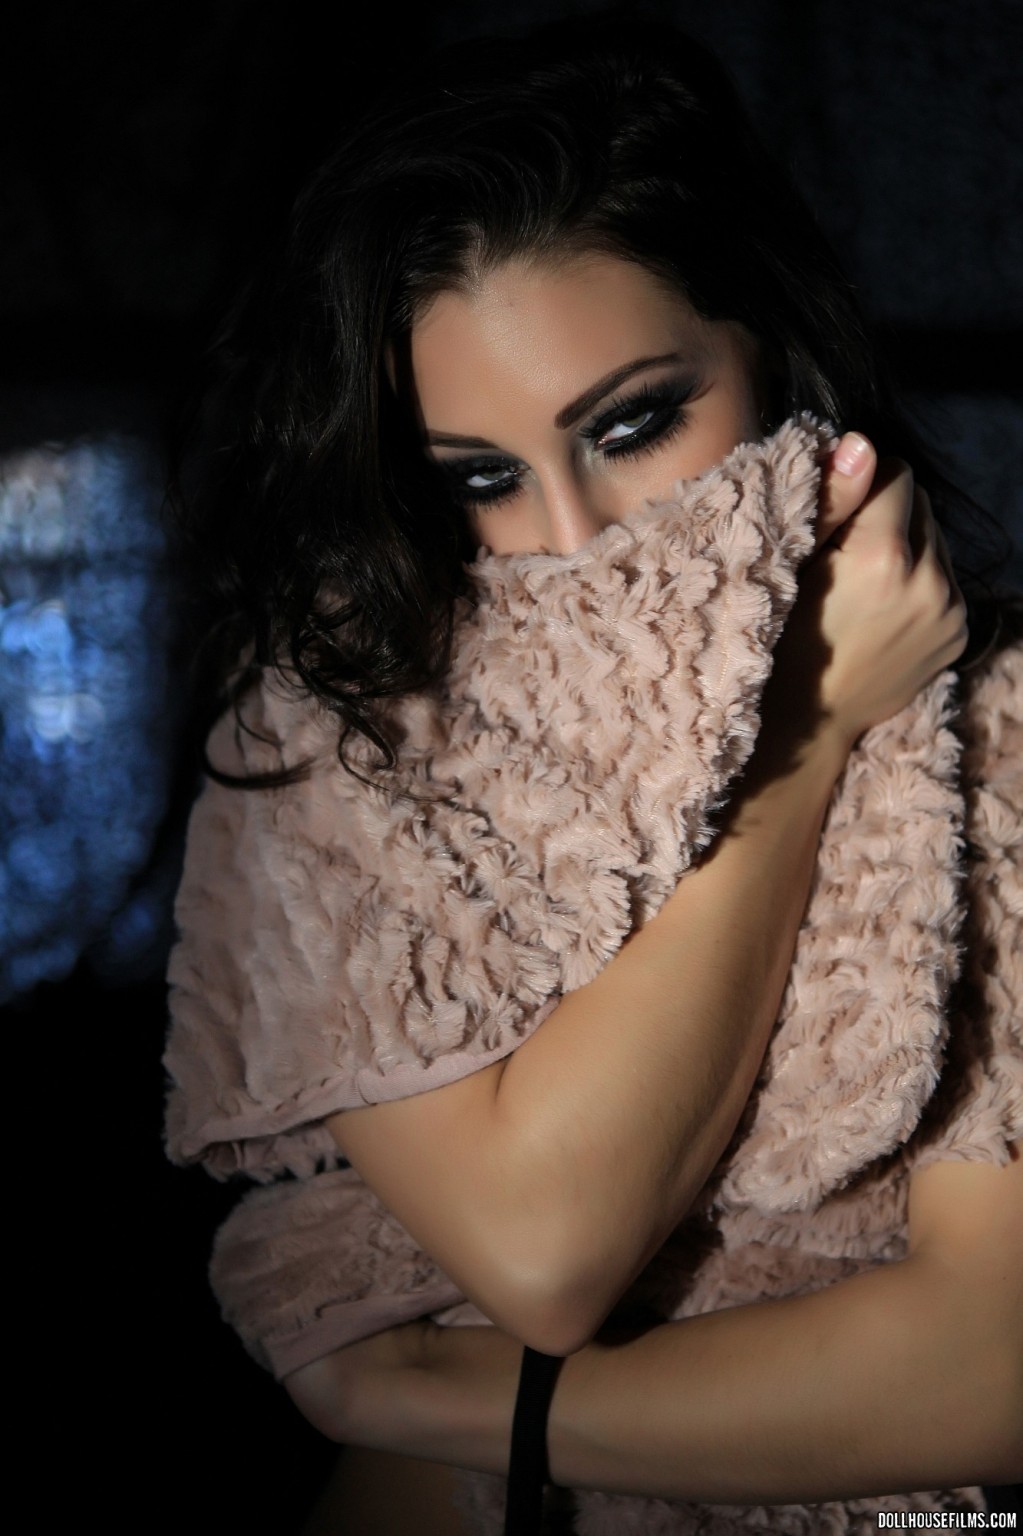 Gracie Glam posing seductively as she toys with a Scarf #71070455